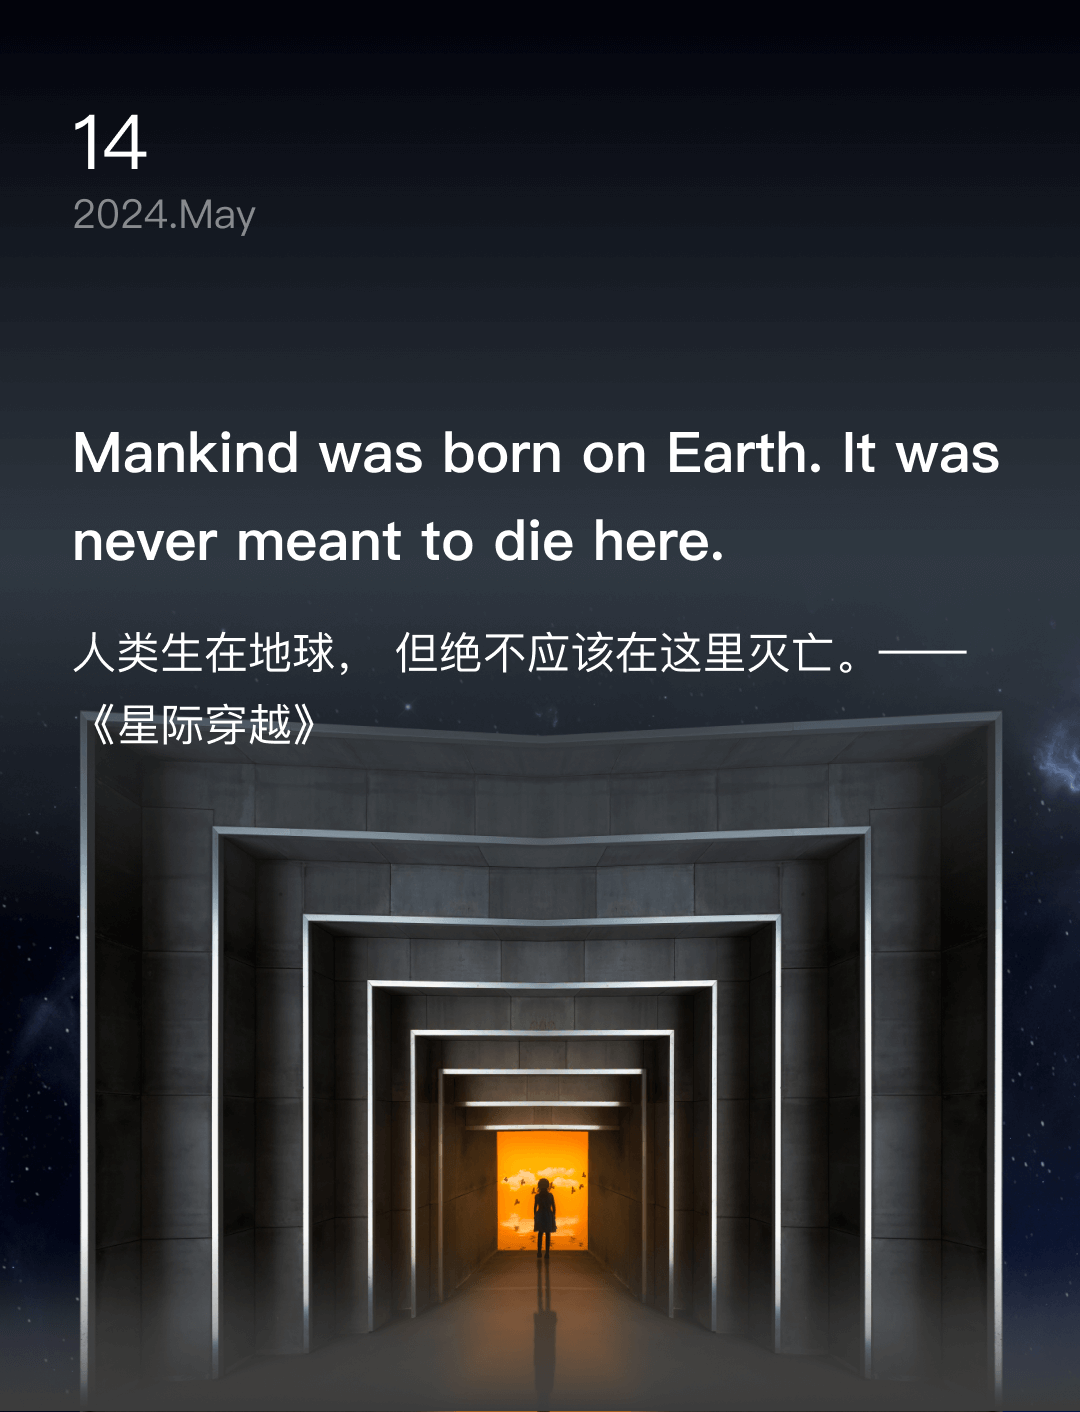 Mankind was born on Earth. It was never meant to die here.